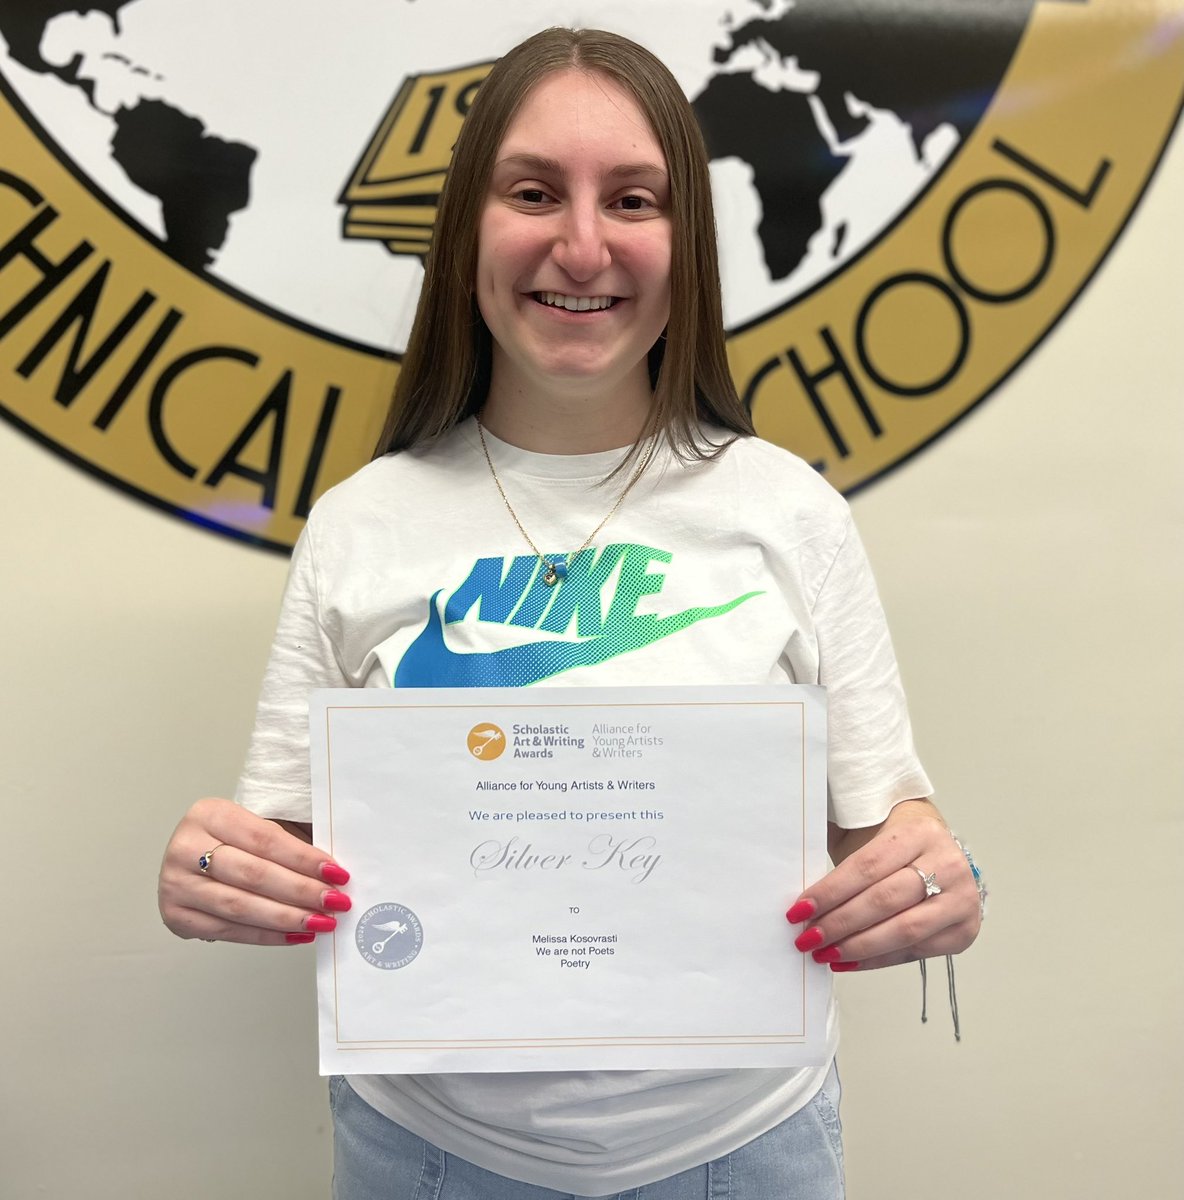 Congratulations to @SITech_HS student, Melissa Kosovrasti, on winning a Scholastic @artandwriting Alliance for Young Artists & Writers #SilverKey Award for her poem, “We are not Poets.” @CSD31SI @ArtsEd_SI_BKS